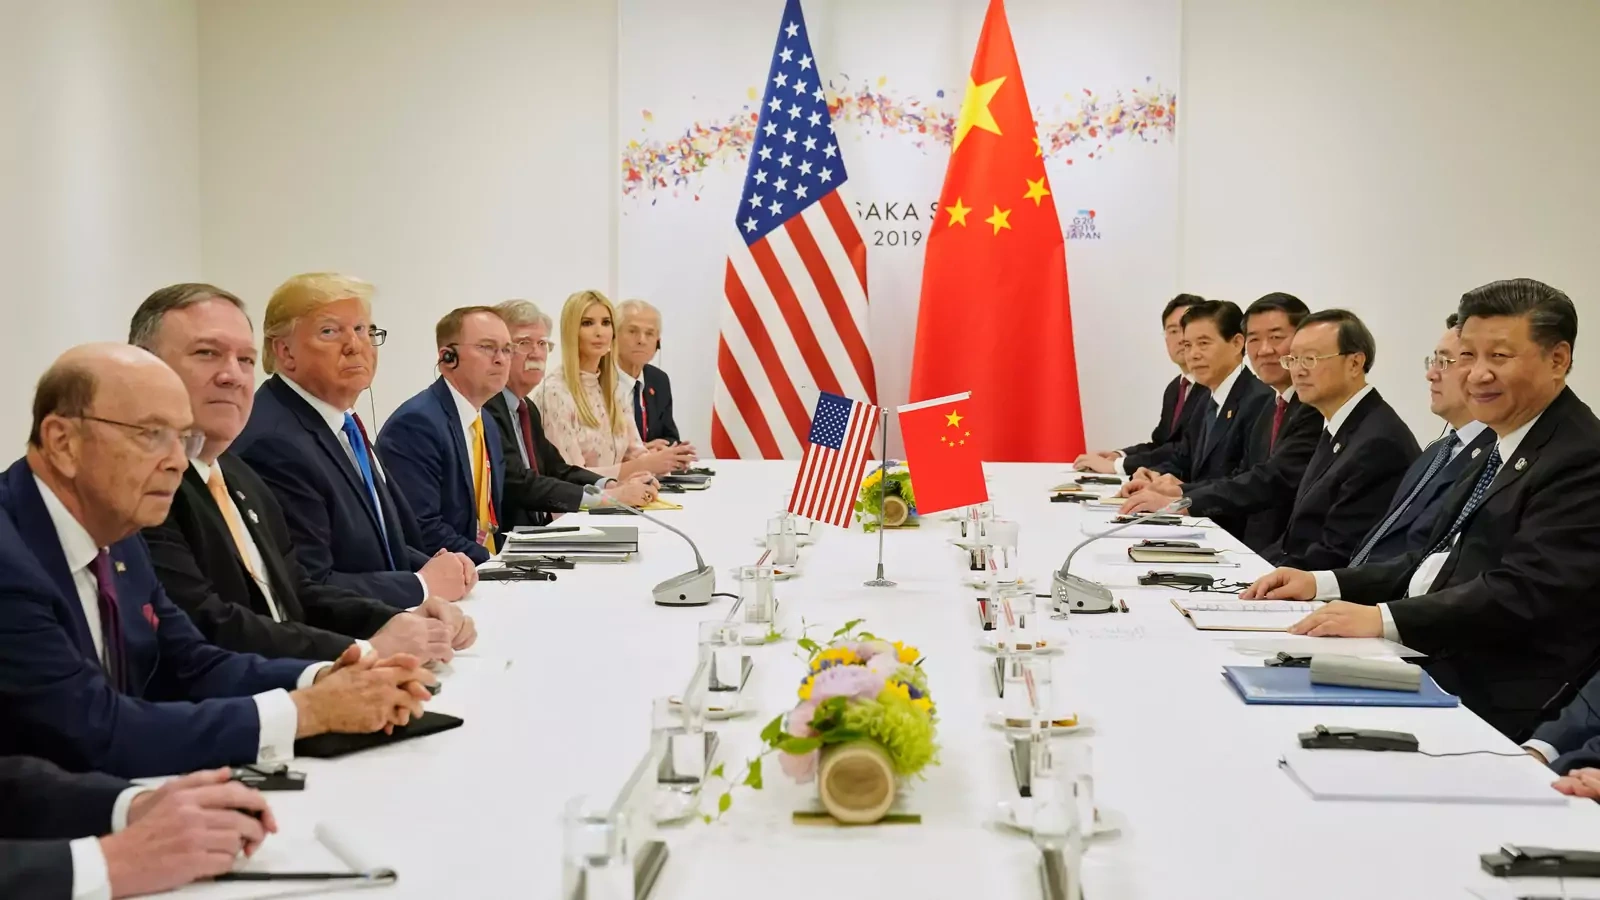 U.S. President Donald Trump and China's President Xi Jinping hold a bilateral meeting during the G20 leaders summit in Osaka, Japan, June 29, 2019.